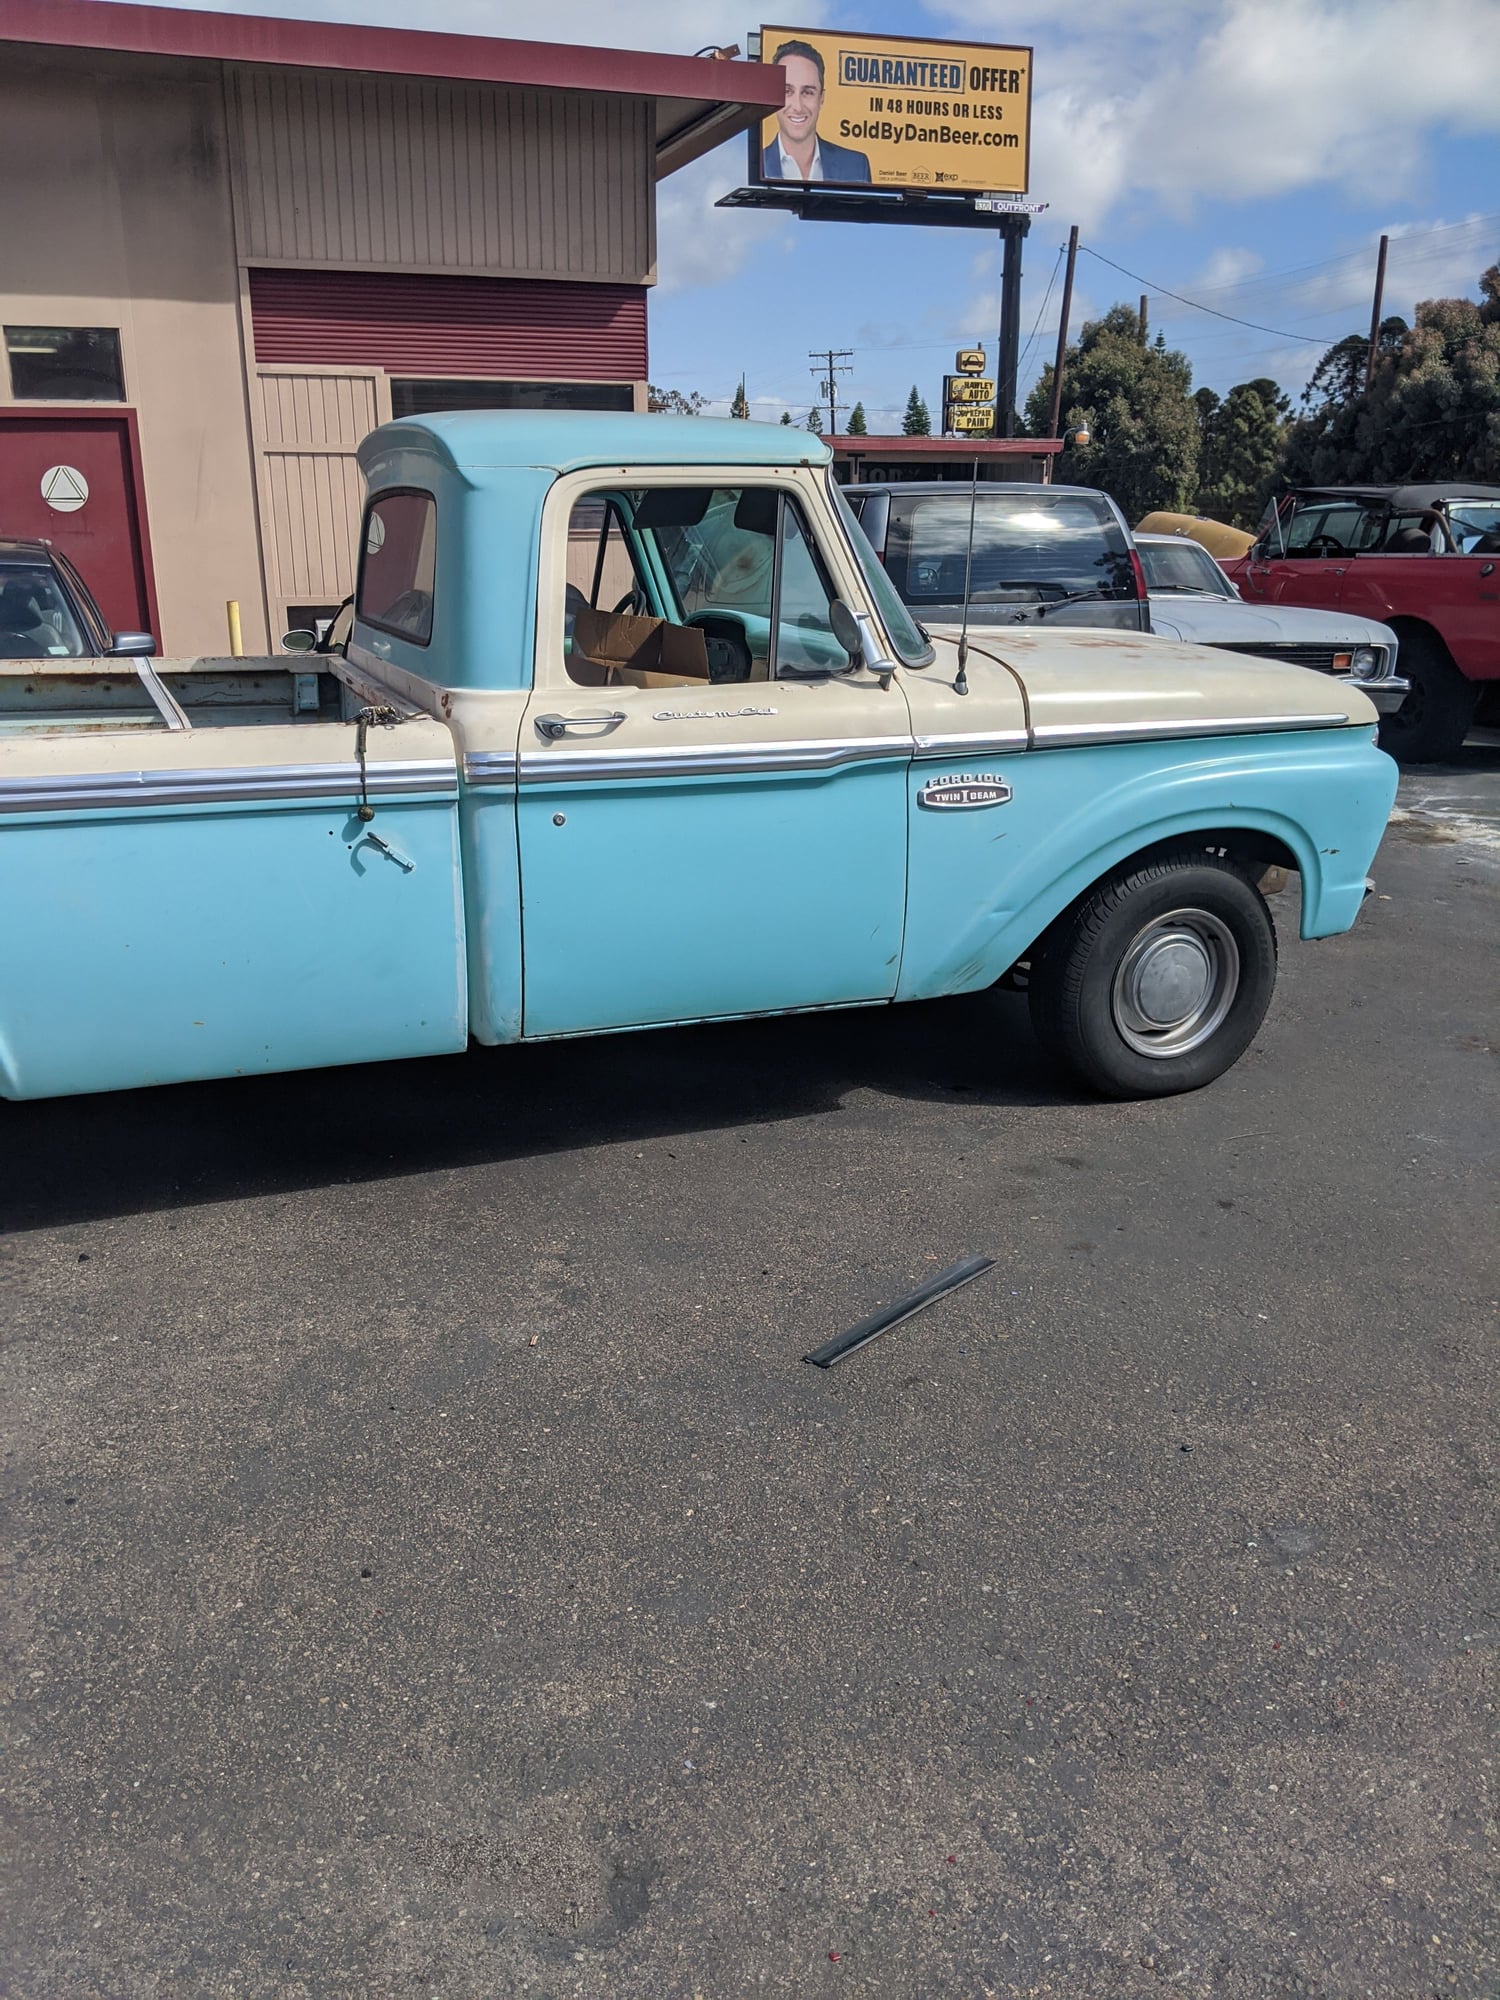 1965 Ford F-100 - 1965 F-100 Rust free project!! - Used - VIN F10DK603484 - 64,247 Miles - 8 cyl - 2WD - Automatic - Truck - Blue - San Diego, CA 92021, United States